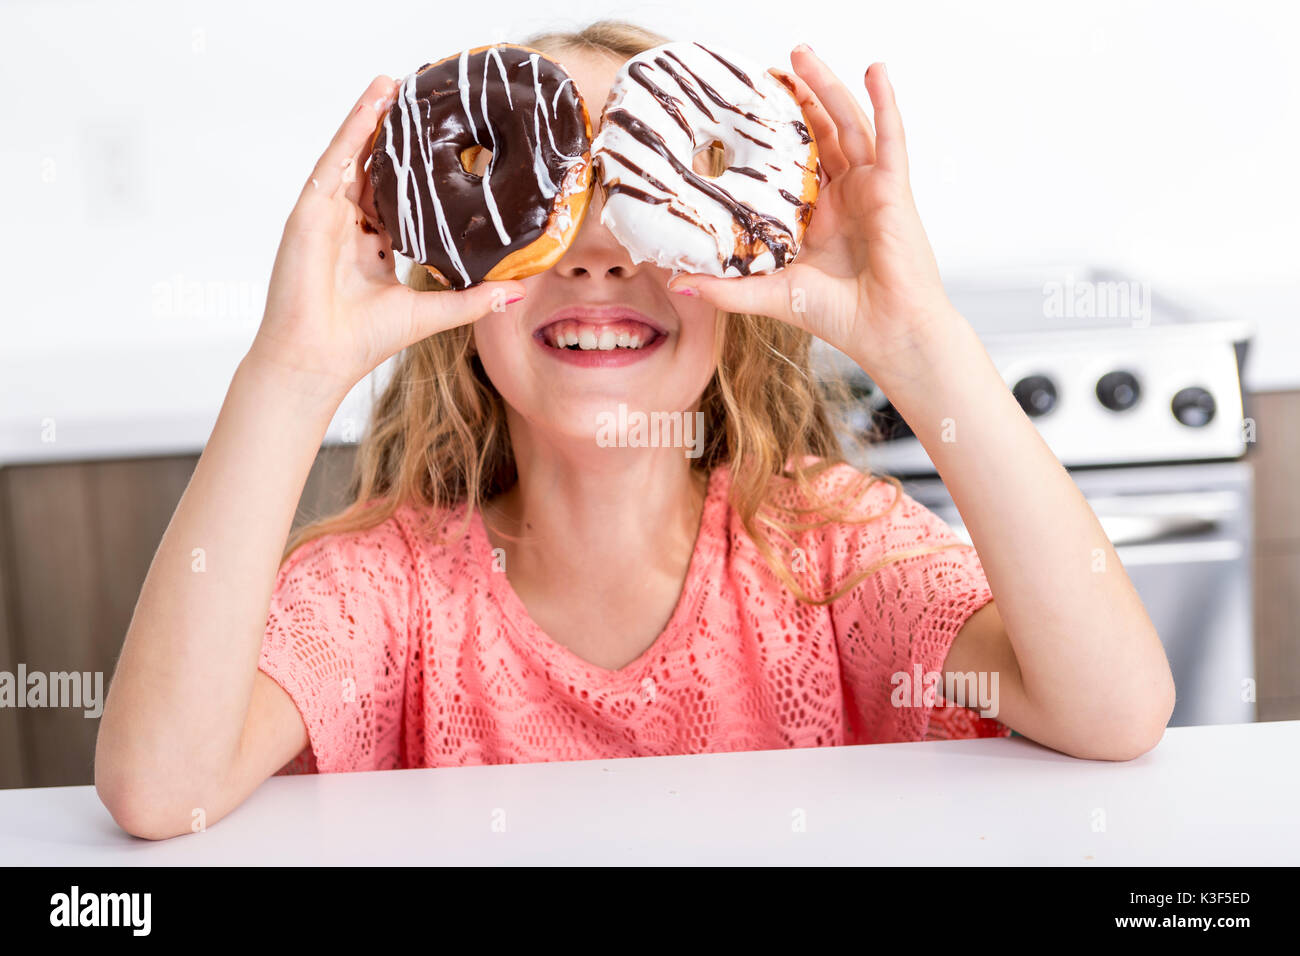 child playing with donuts in her hands putting them on her face Stock Photo